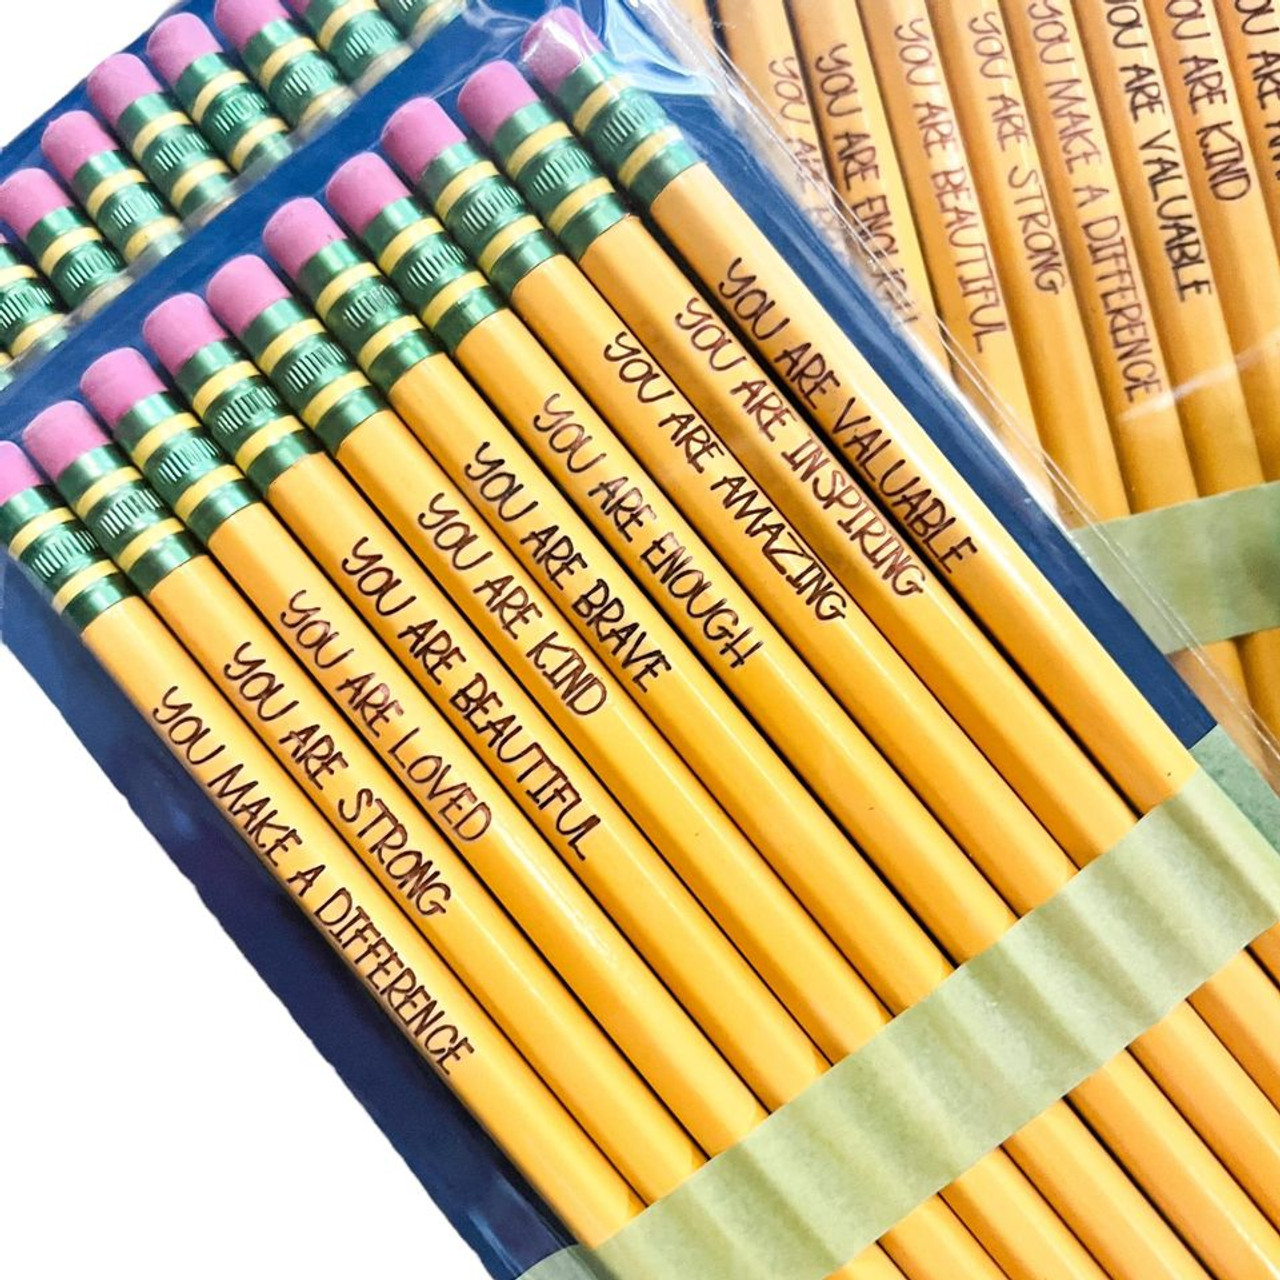 DASHENRAN Affirmation Pencil Set, Motivational Pencils, Personalized  Compliment Wood Pencils, Pencil Set for Sketching and Drawing, for Students  and